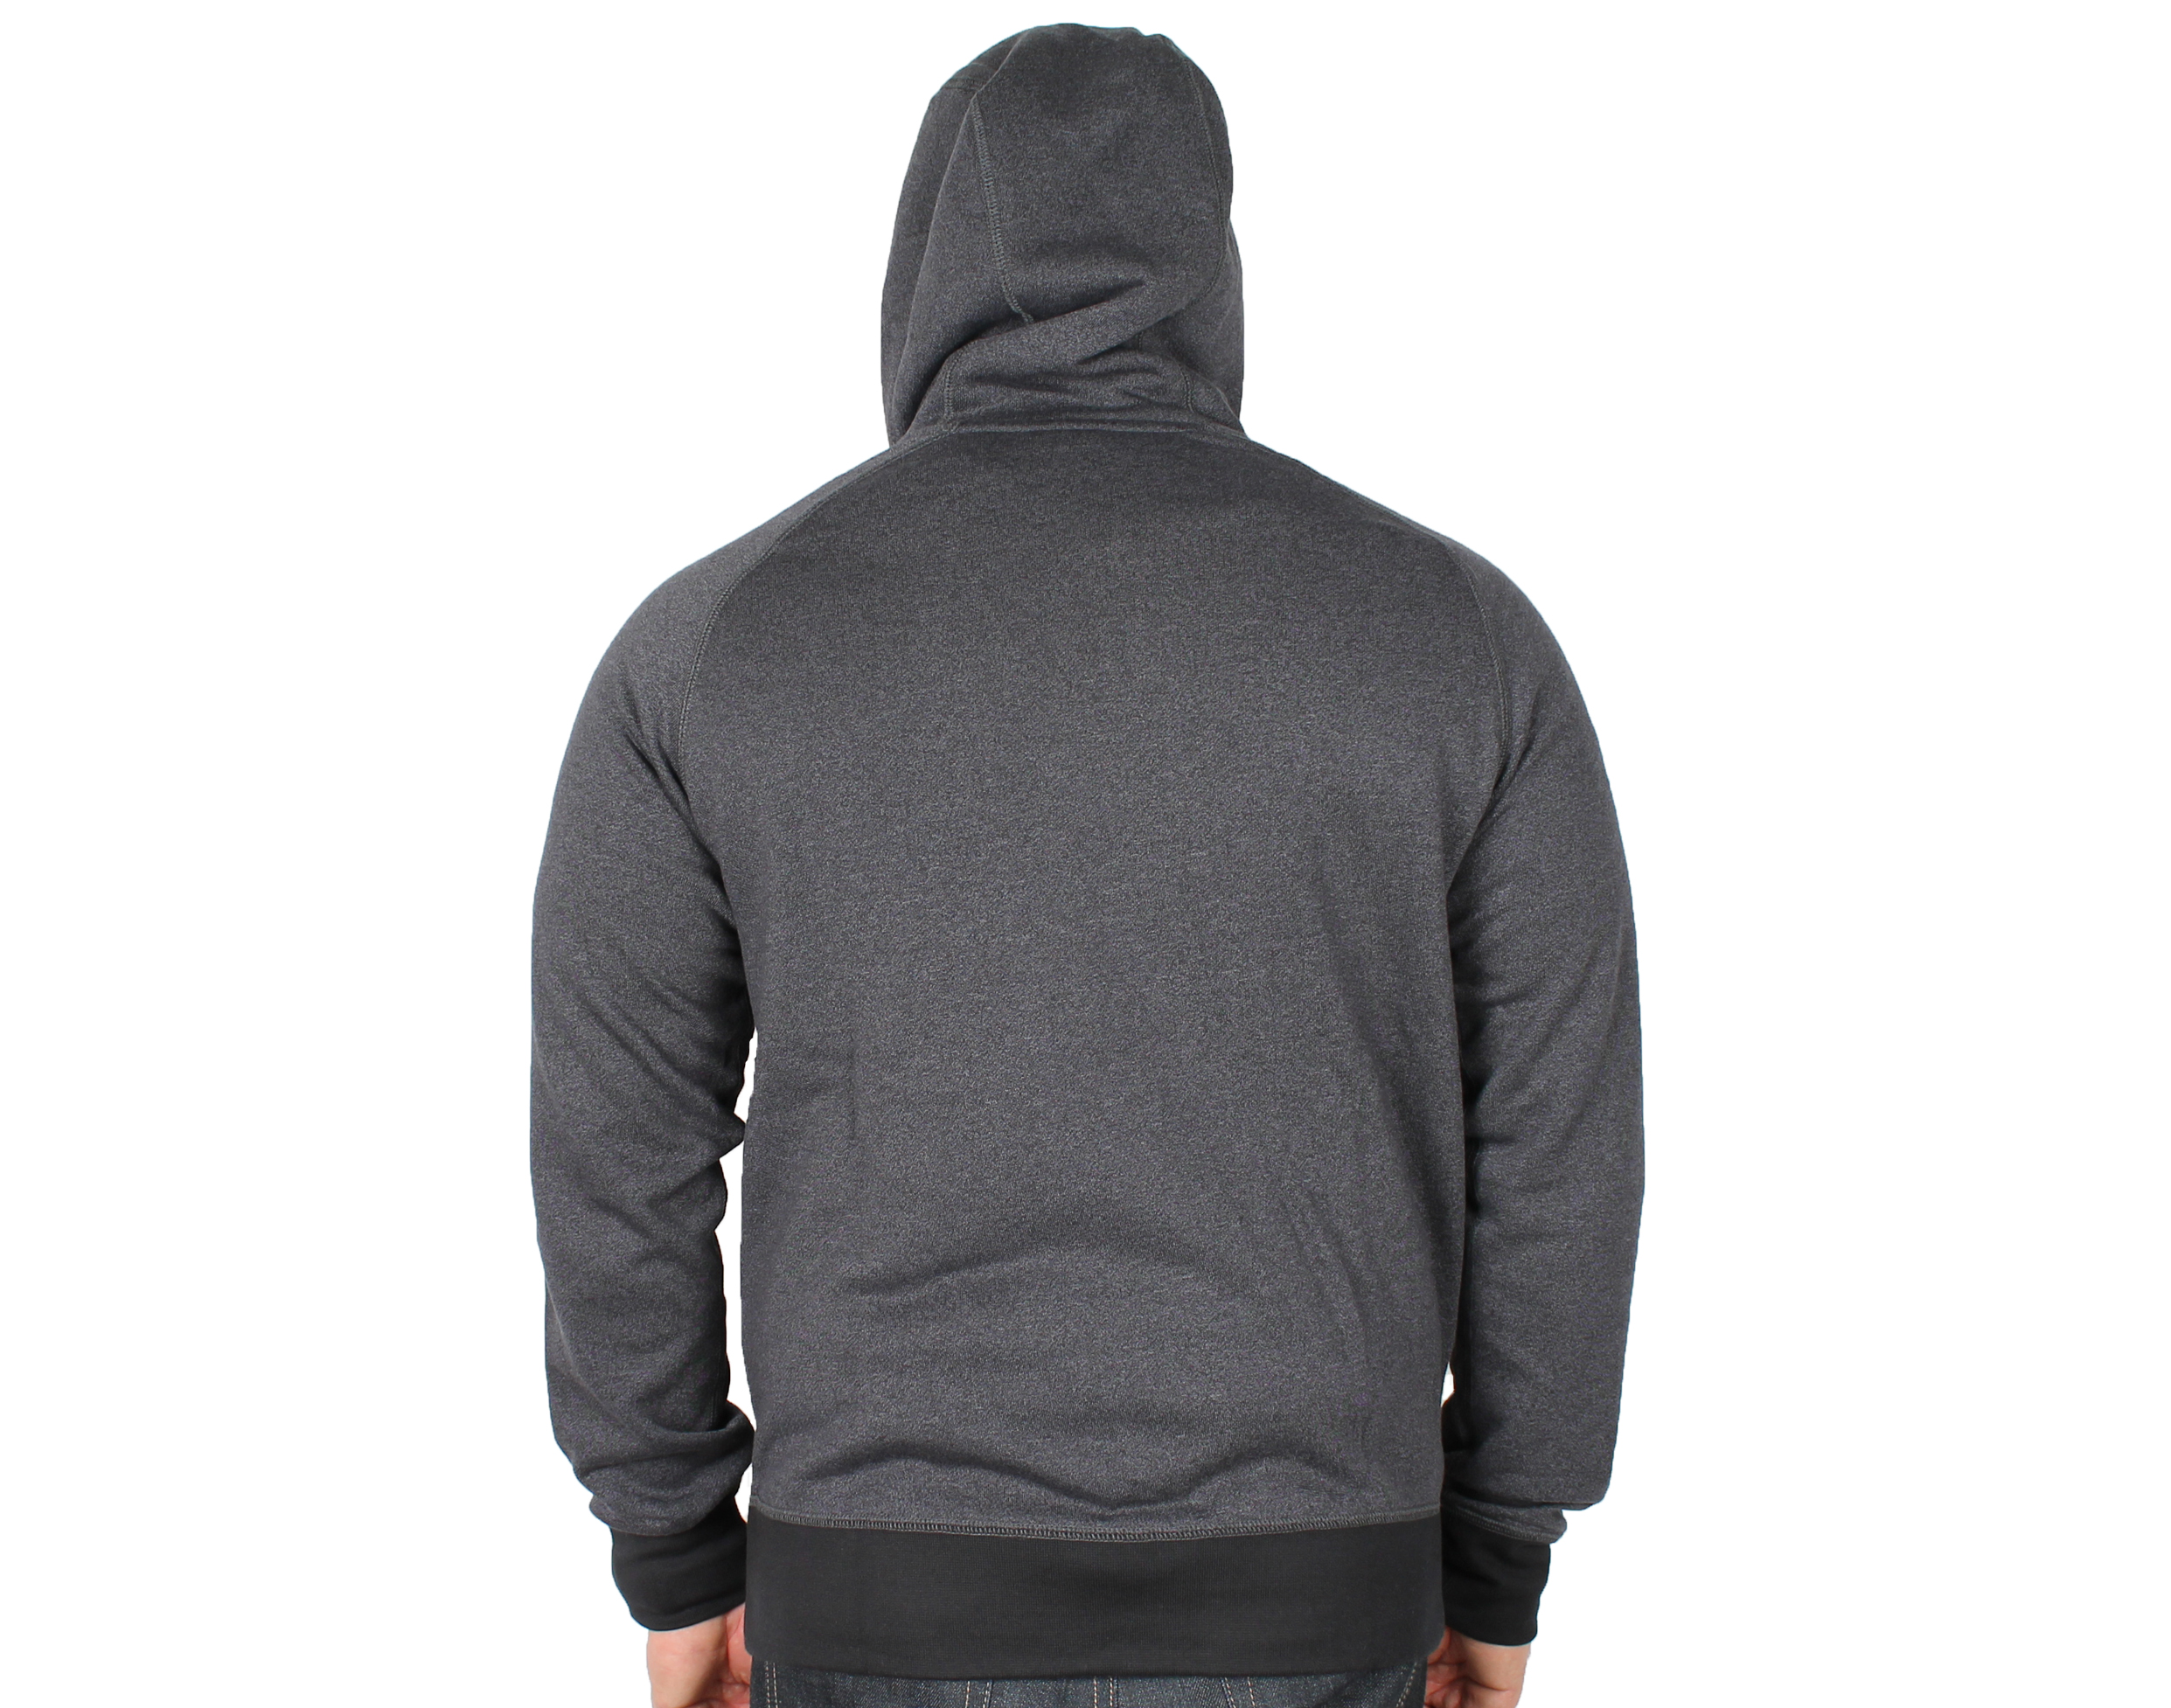 Nike AW77 French Terry Shoebox Men's Hoodie Small - image 2 of 3